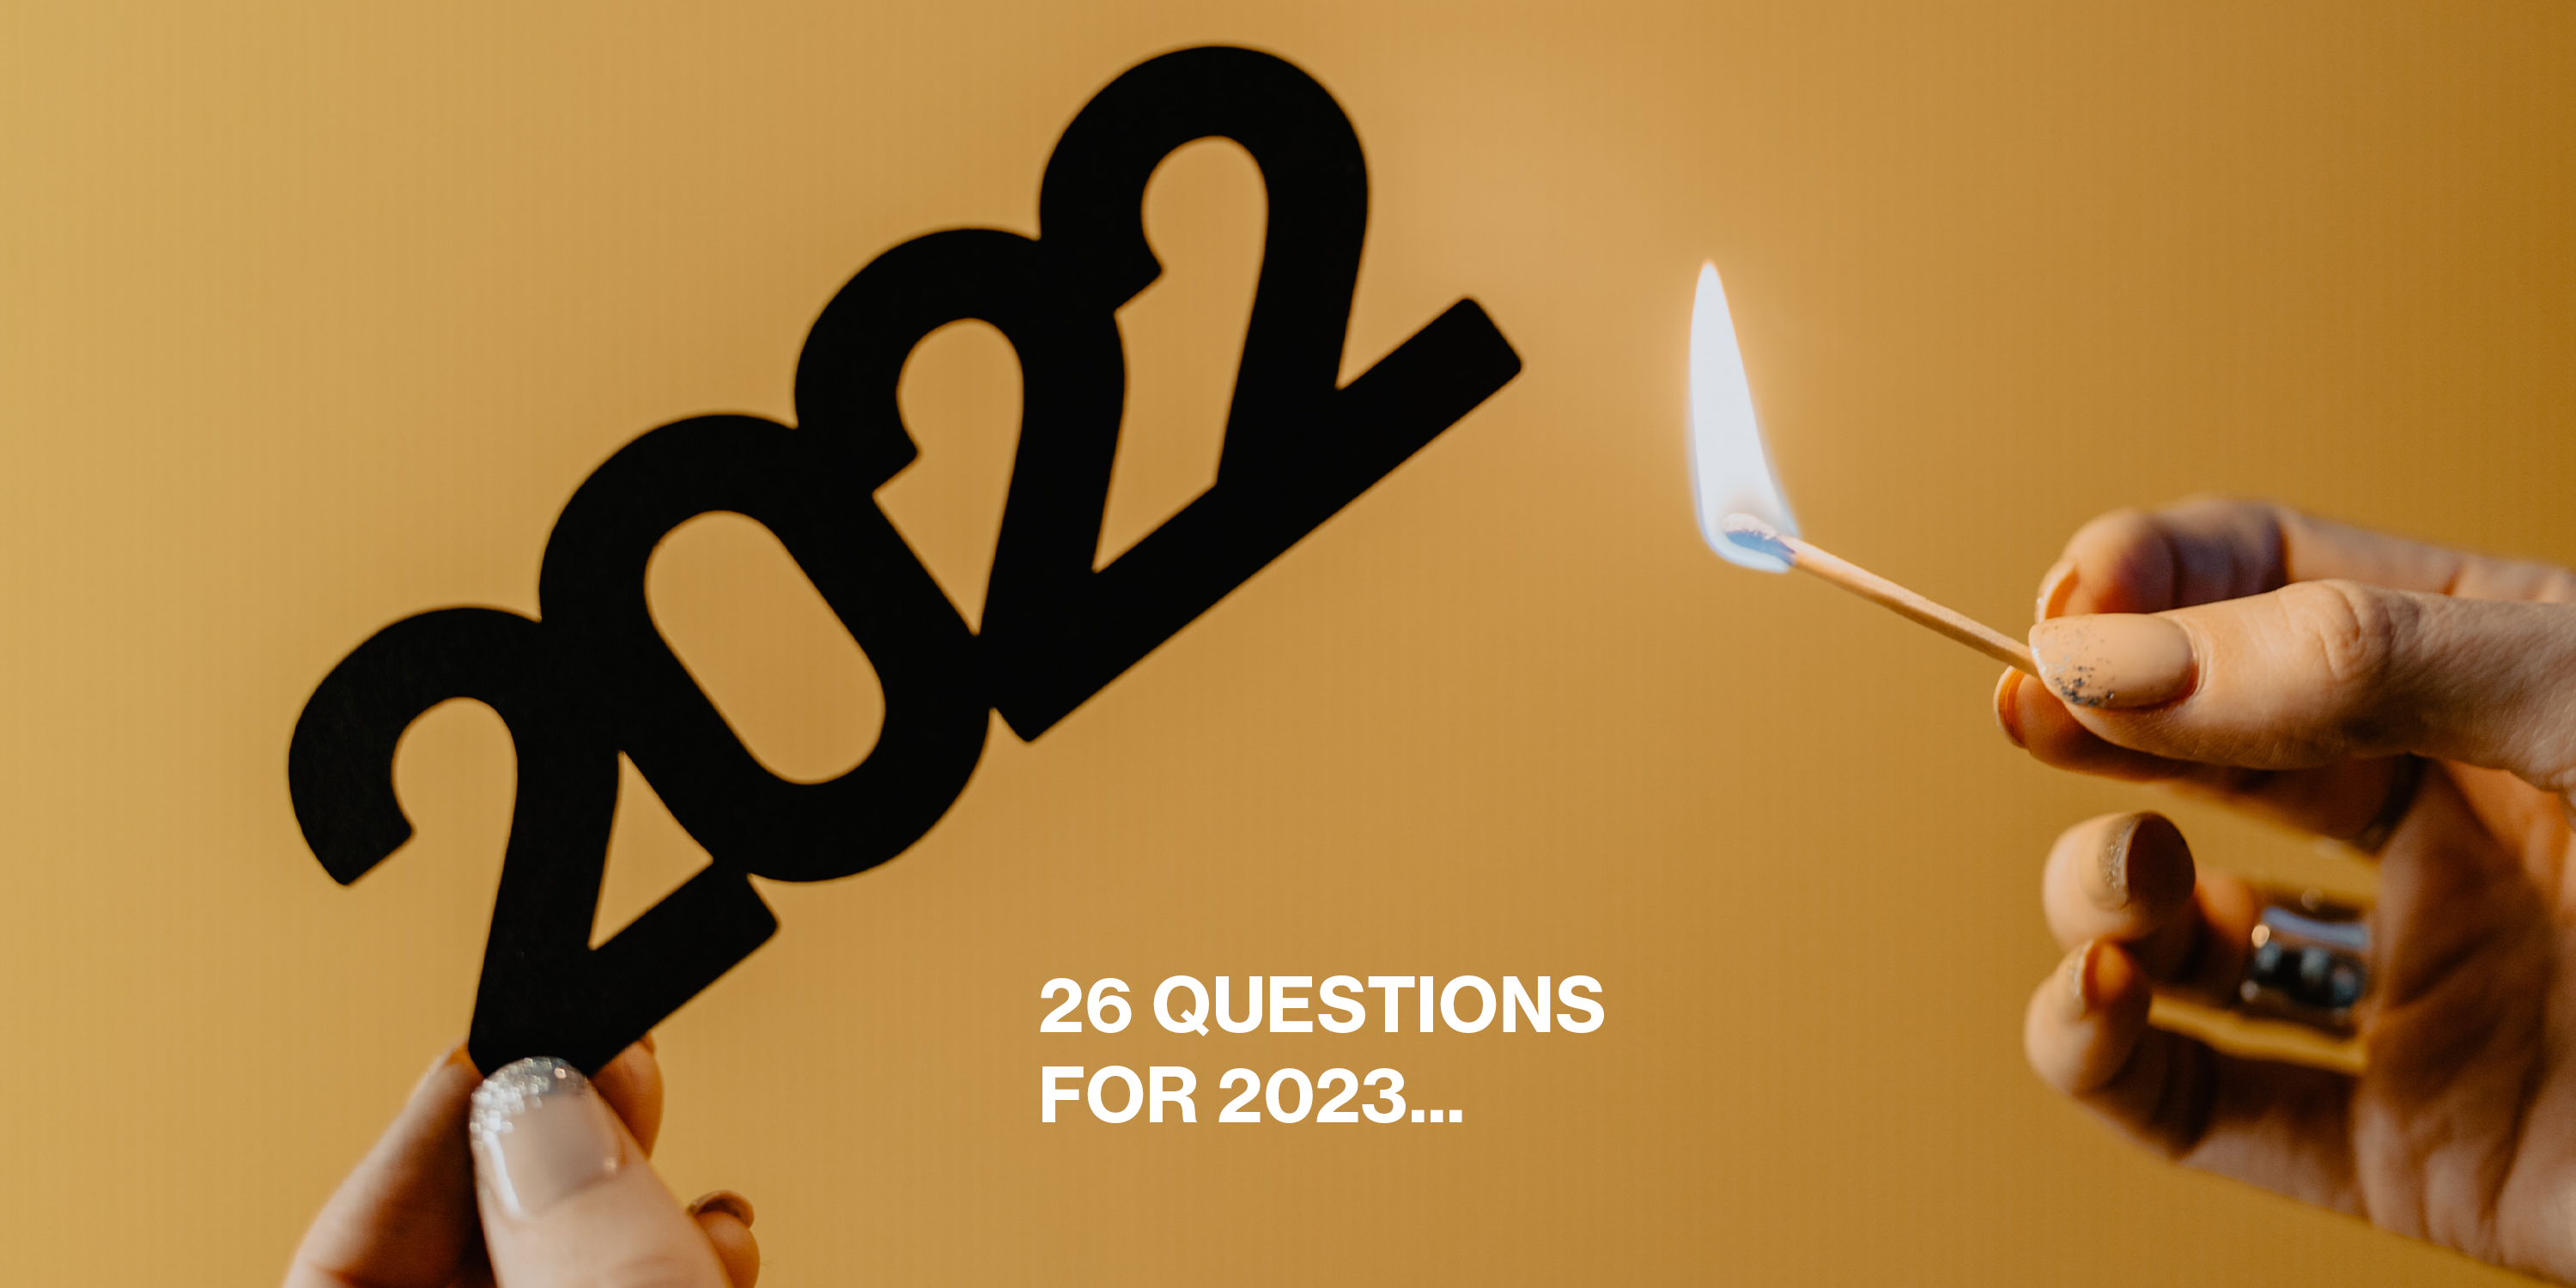 26 Questions for 2023